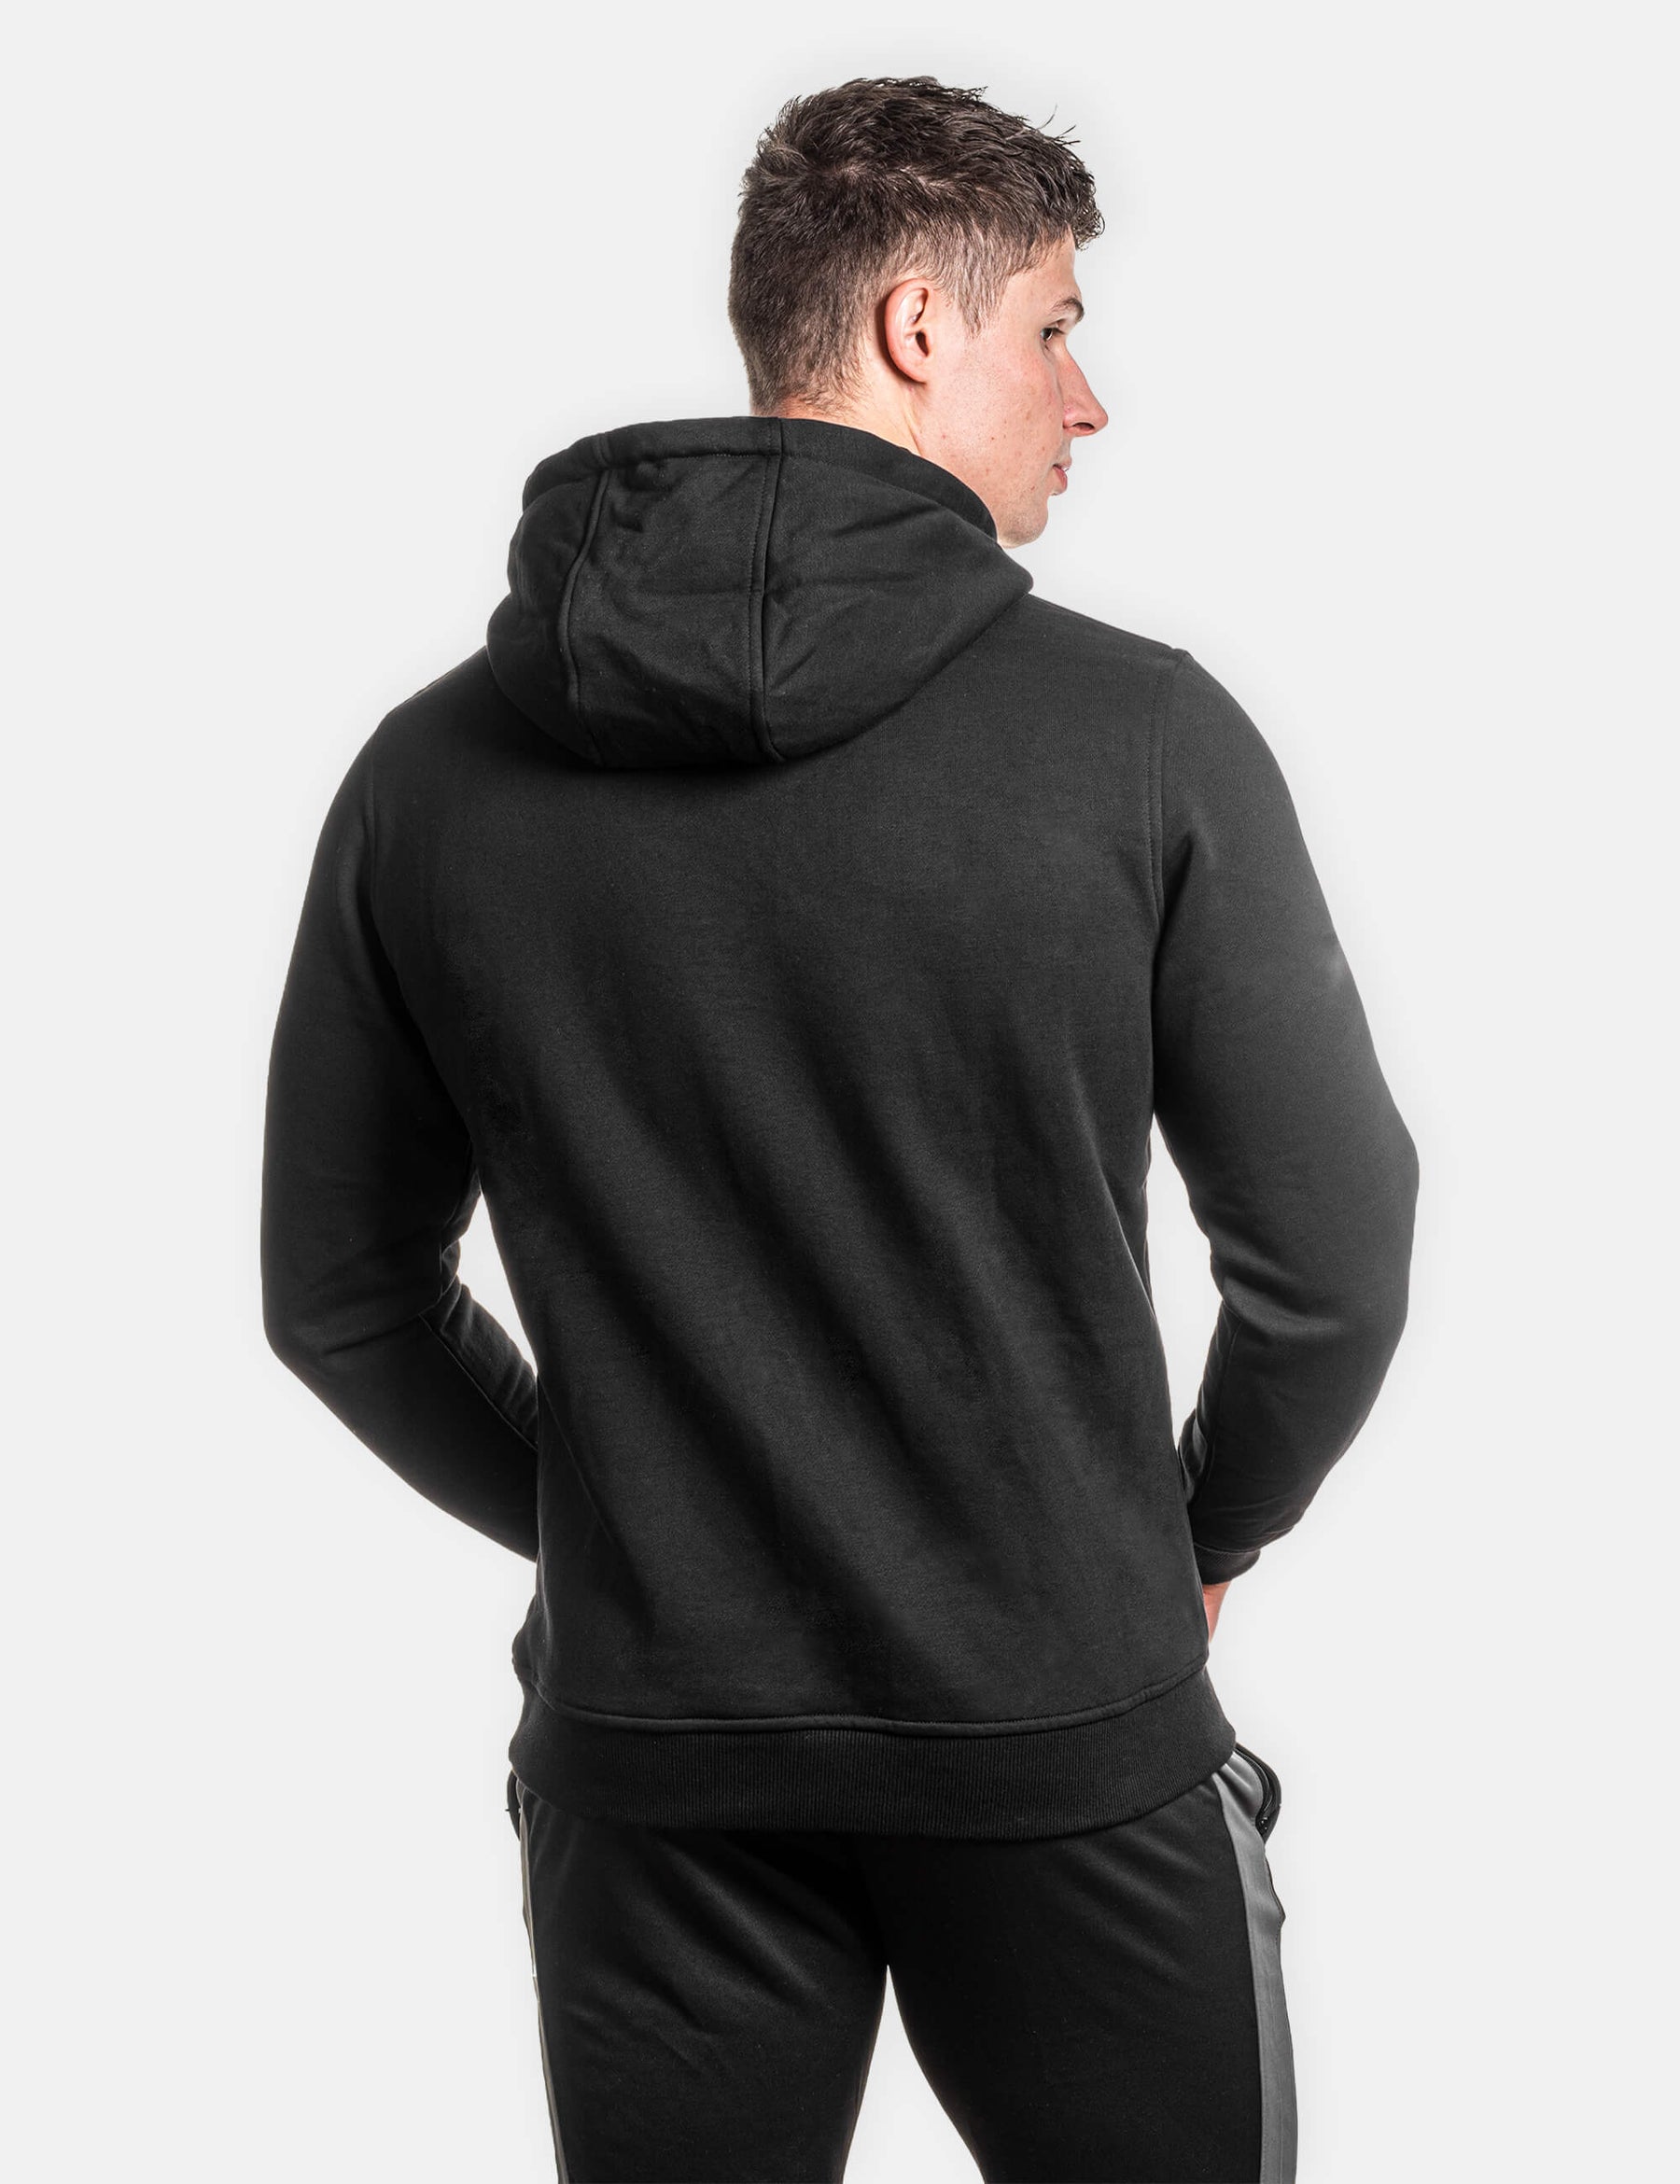 Backview of the Calisthenics Black hoodie and performance sweatpants.